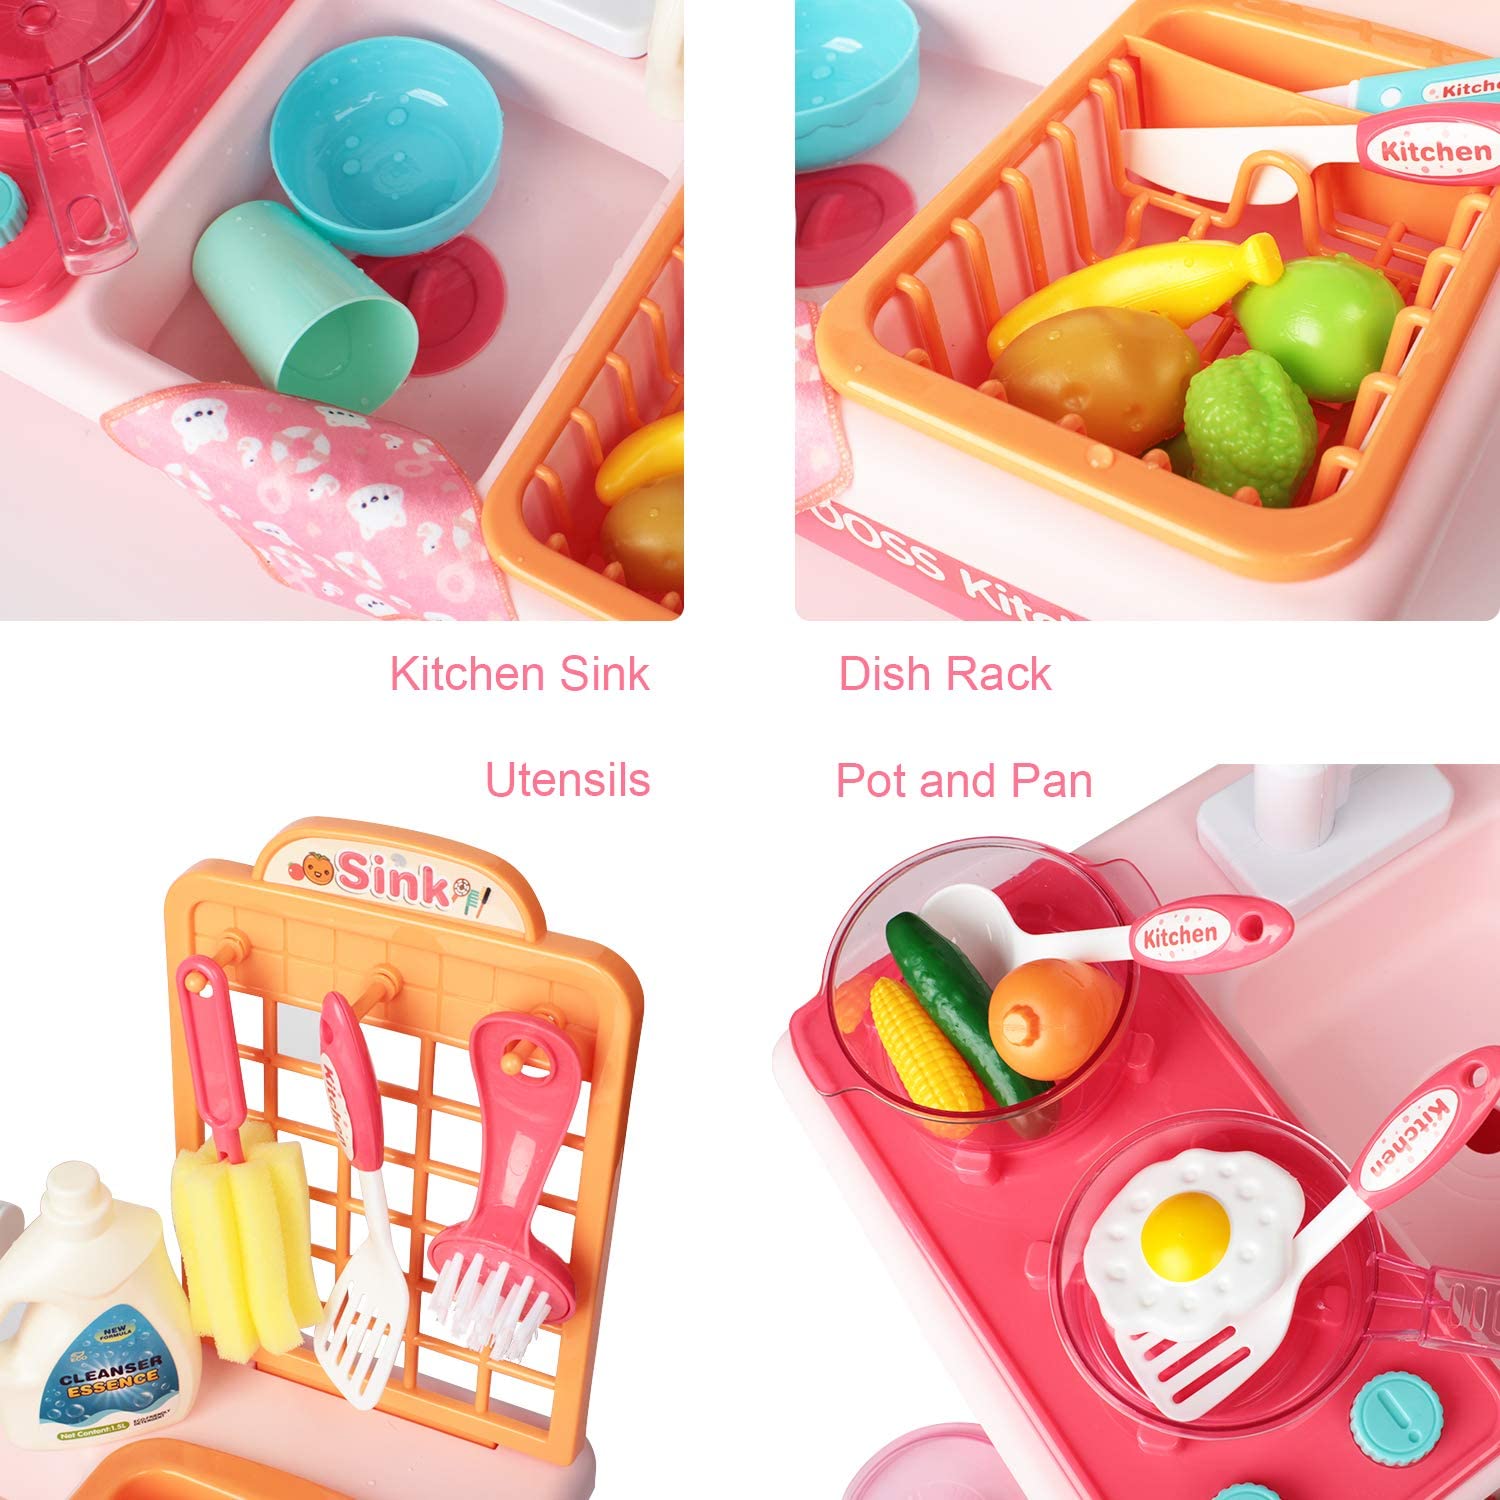 Kids Play Pretend Kitchen Sink Toys with Running Water, Dish-Washing  Playset, Role Play Sink Set Birthday Gifts for Kids Boys Girls